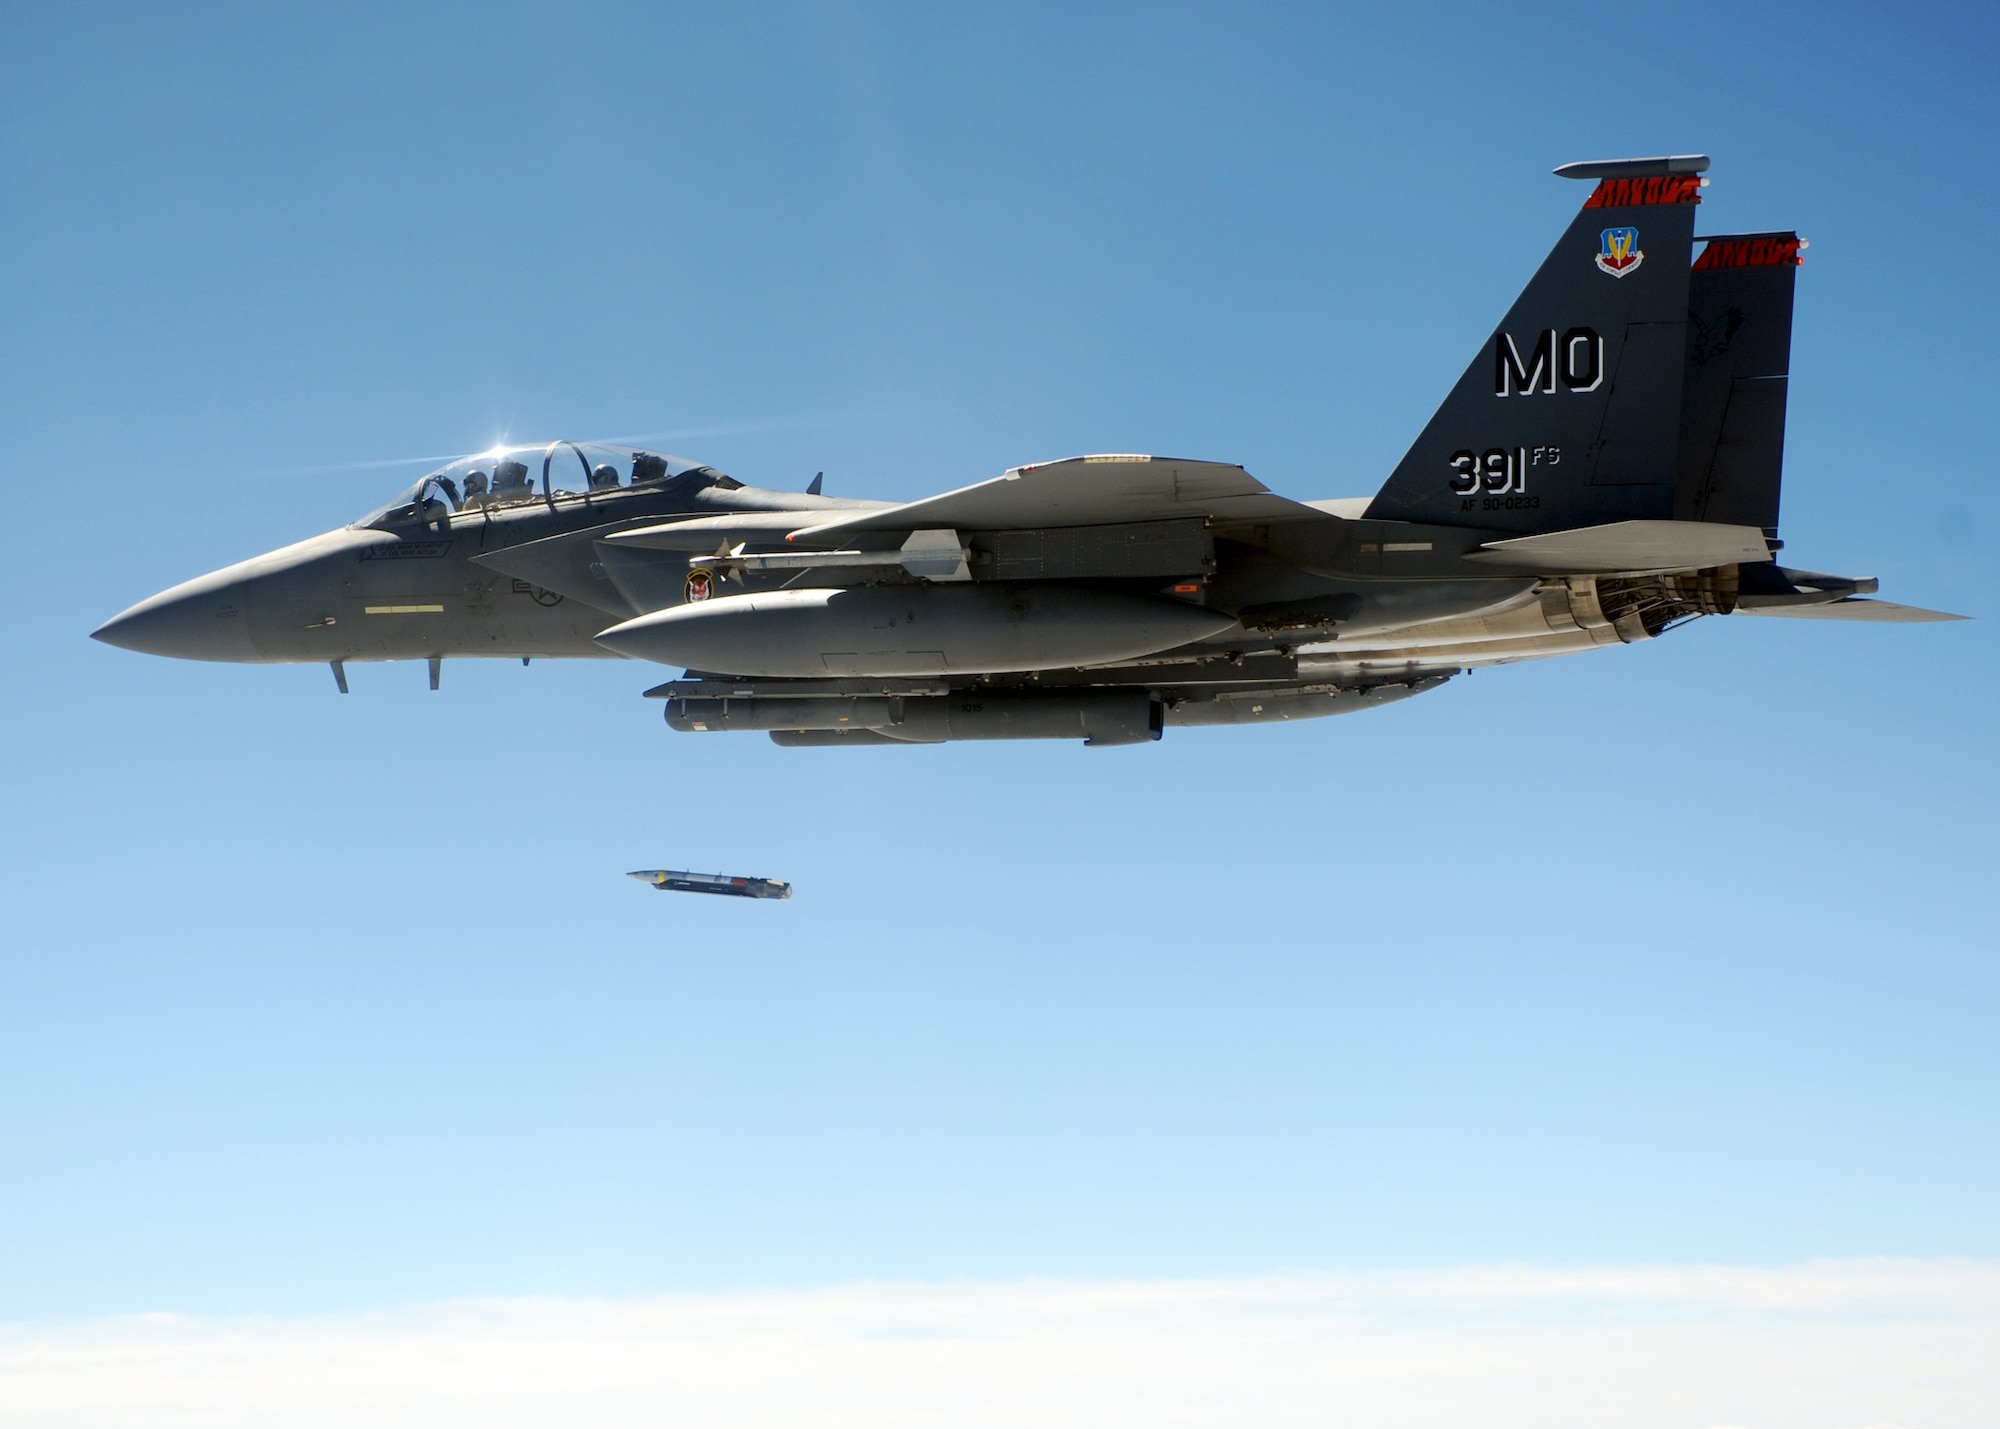 An F-15E Strike Eagle from the 391st Fighter Squadron drops a small diameter bomb during a Combat Hammer mission at Hill Air Force Base, Utah.  Combat Hammer is an air-to-ground Weapons System Evaluation Program maintained by the 86th Fighter Weapons Squadron.  Combat Hammer marked the first of three weeks of evaluation at Hill AFB by the 53rd Weapons Evaluation Group.  Combat Archer, an air-to-air evaluation, is the second week, followed by a combined air and ground WSEP in the final week.  The WSEP program is used to evaluate the effectiveness and suitability of combat air force weapon systems. The evaluations are accomplished during tactical deliveries of fighter, bomber and unmanned aerial system precision guided munitions, on realistic targets with air-to-air and surface-to-air defenses. For many of the aircrew participating in WSEP, it is the first time employing live weapons. This provides a level of combat experience many units face during combat. (Courtesy photo.)
